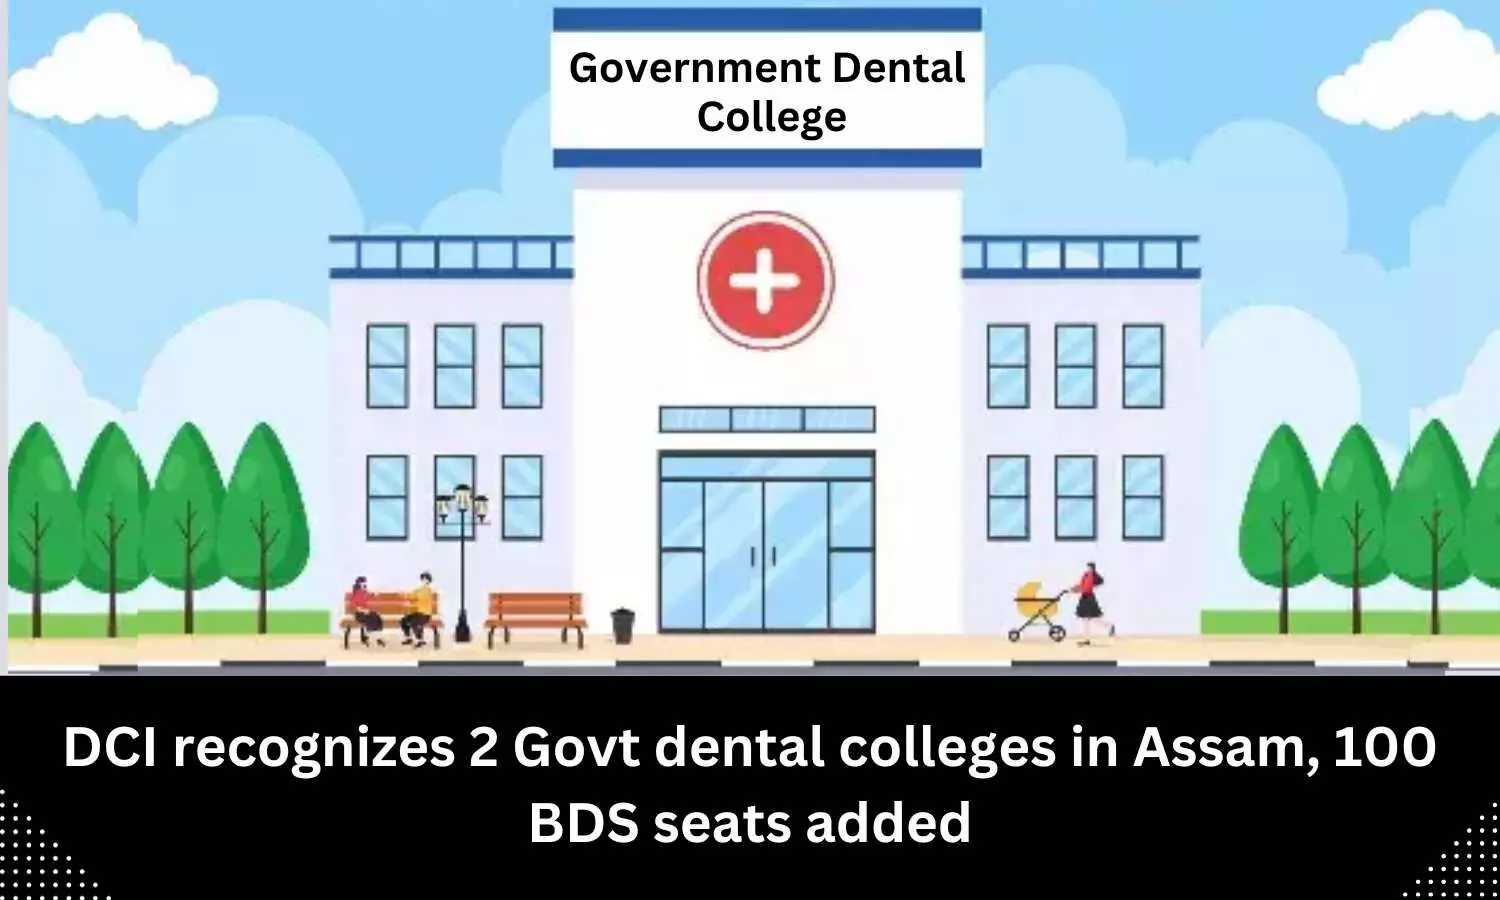 2 Govt dental colleges in Assam recognized by DCI